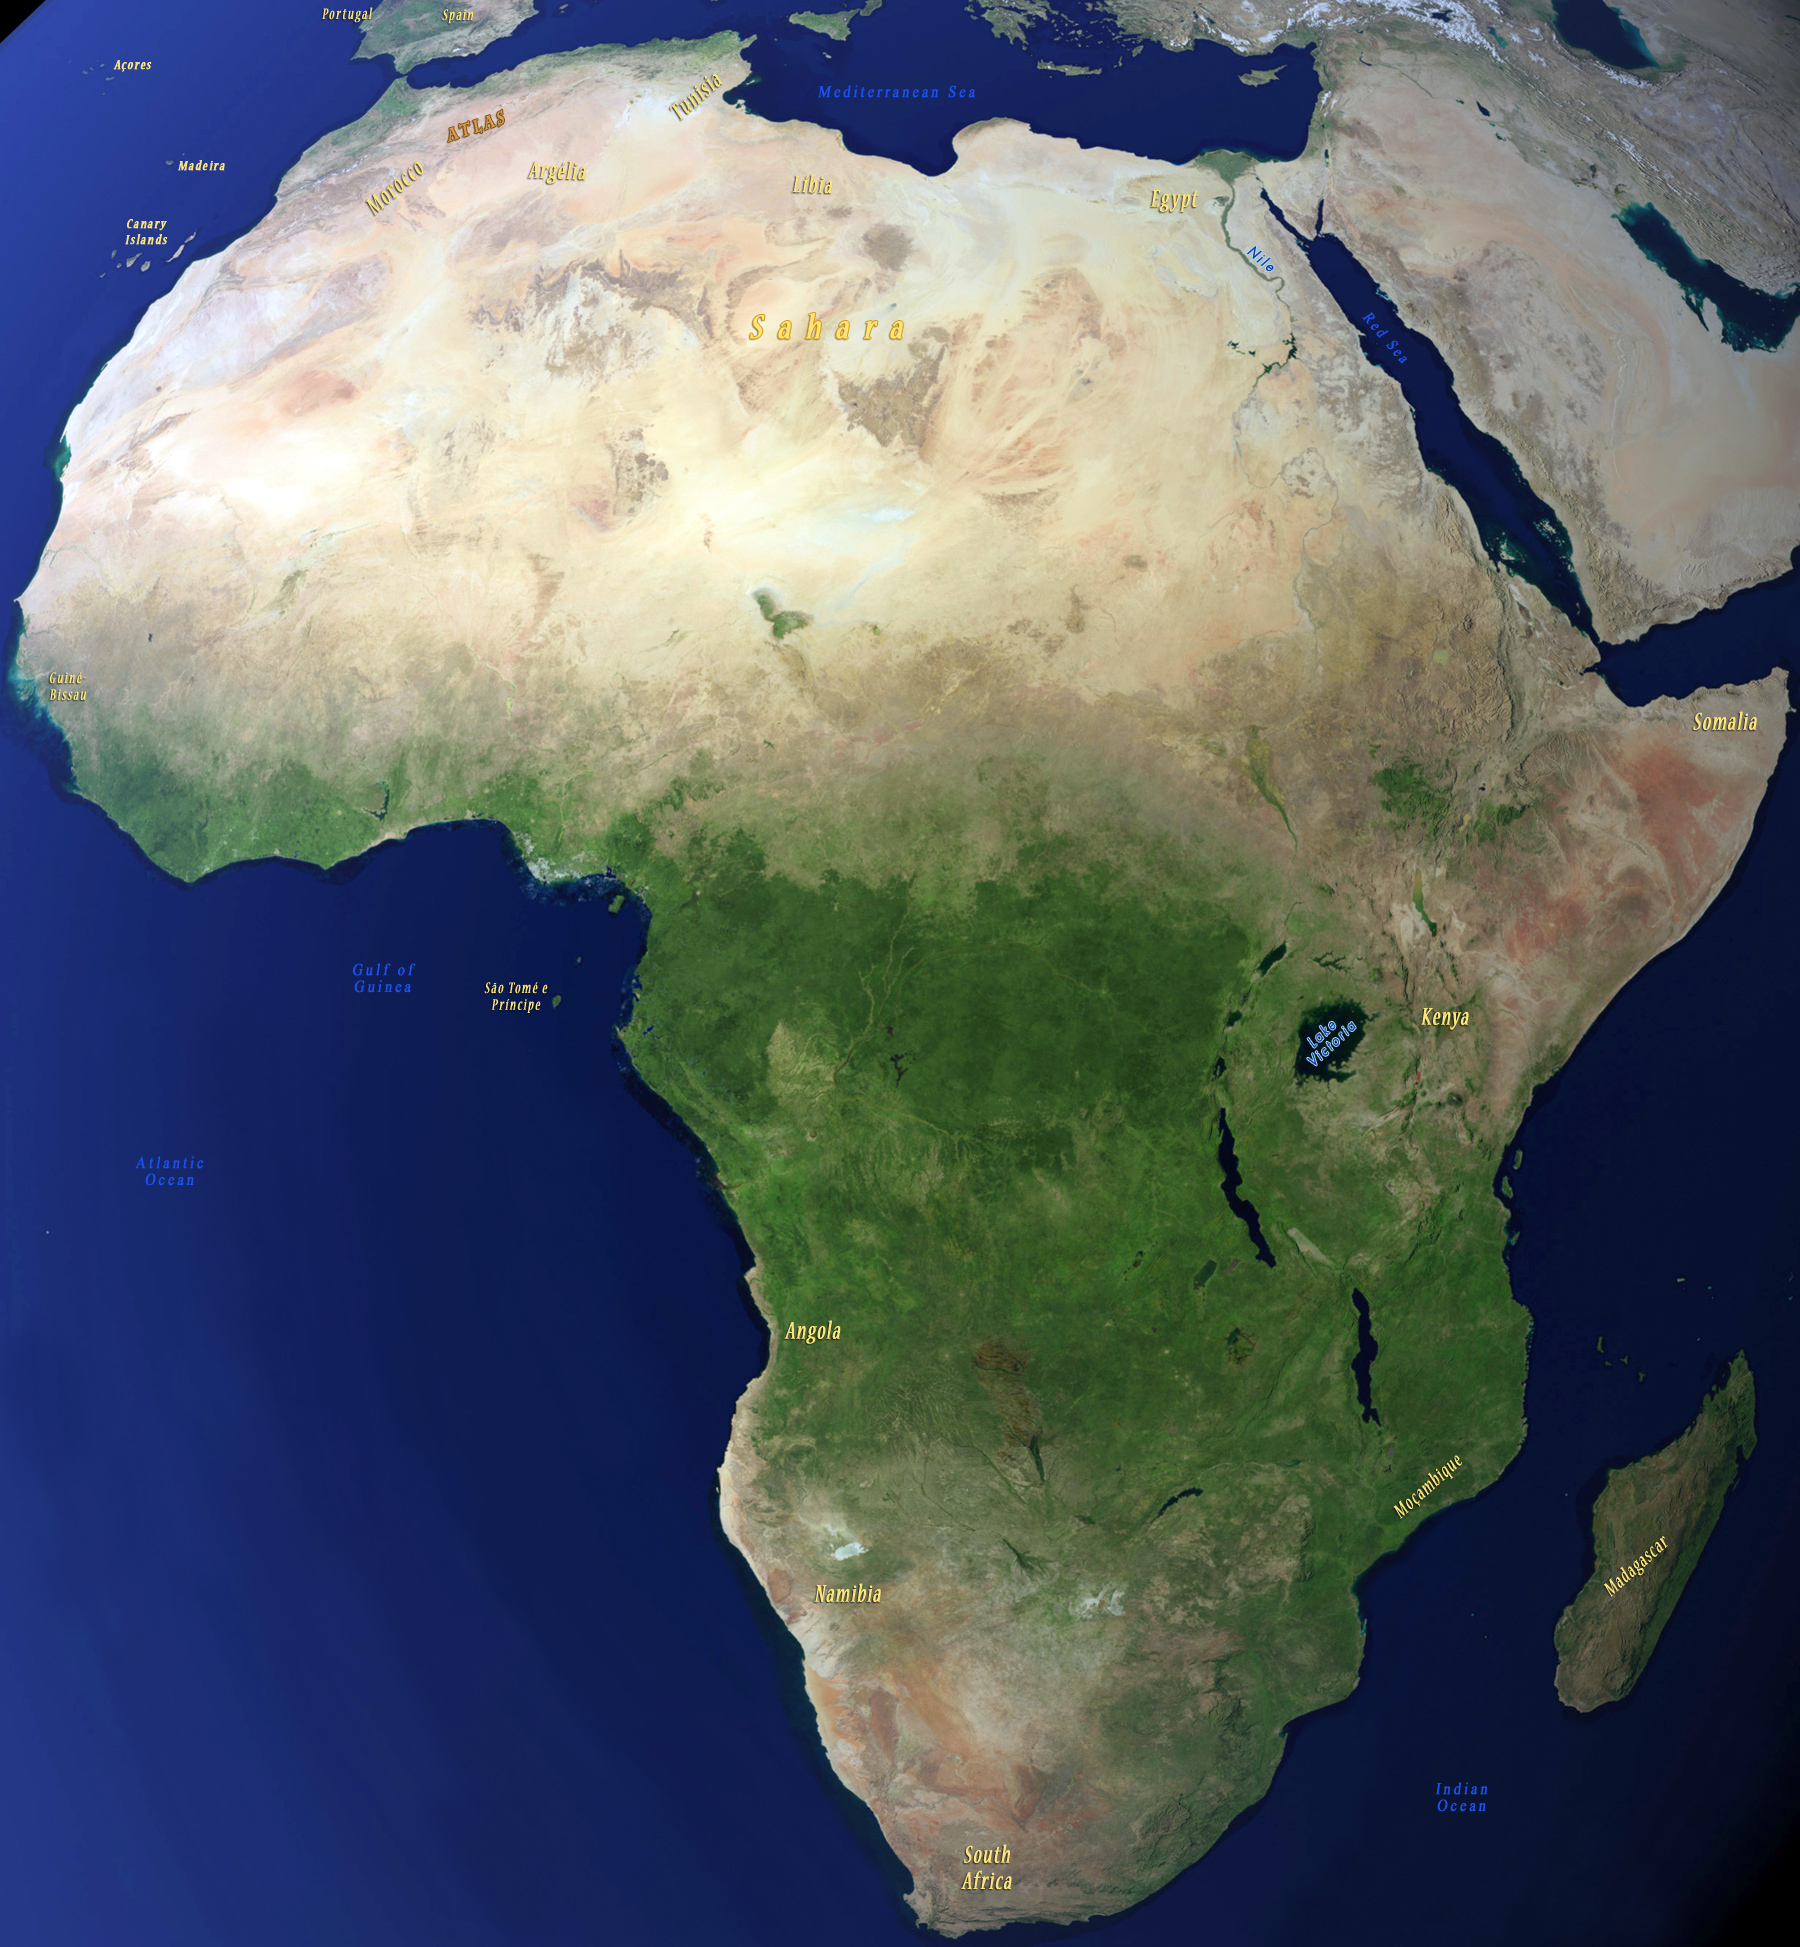 Africa continent image